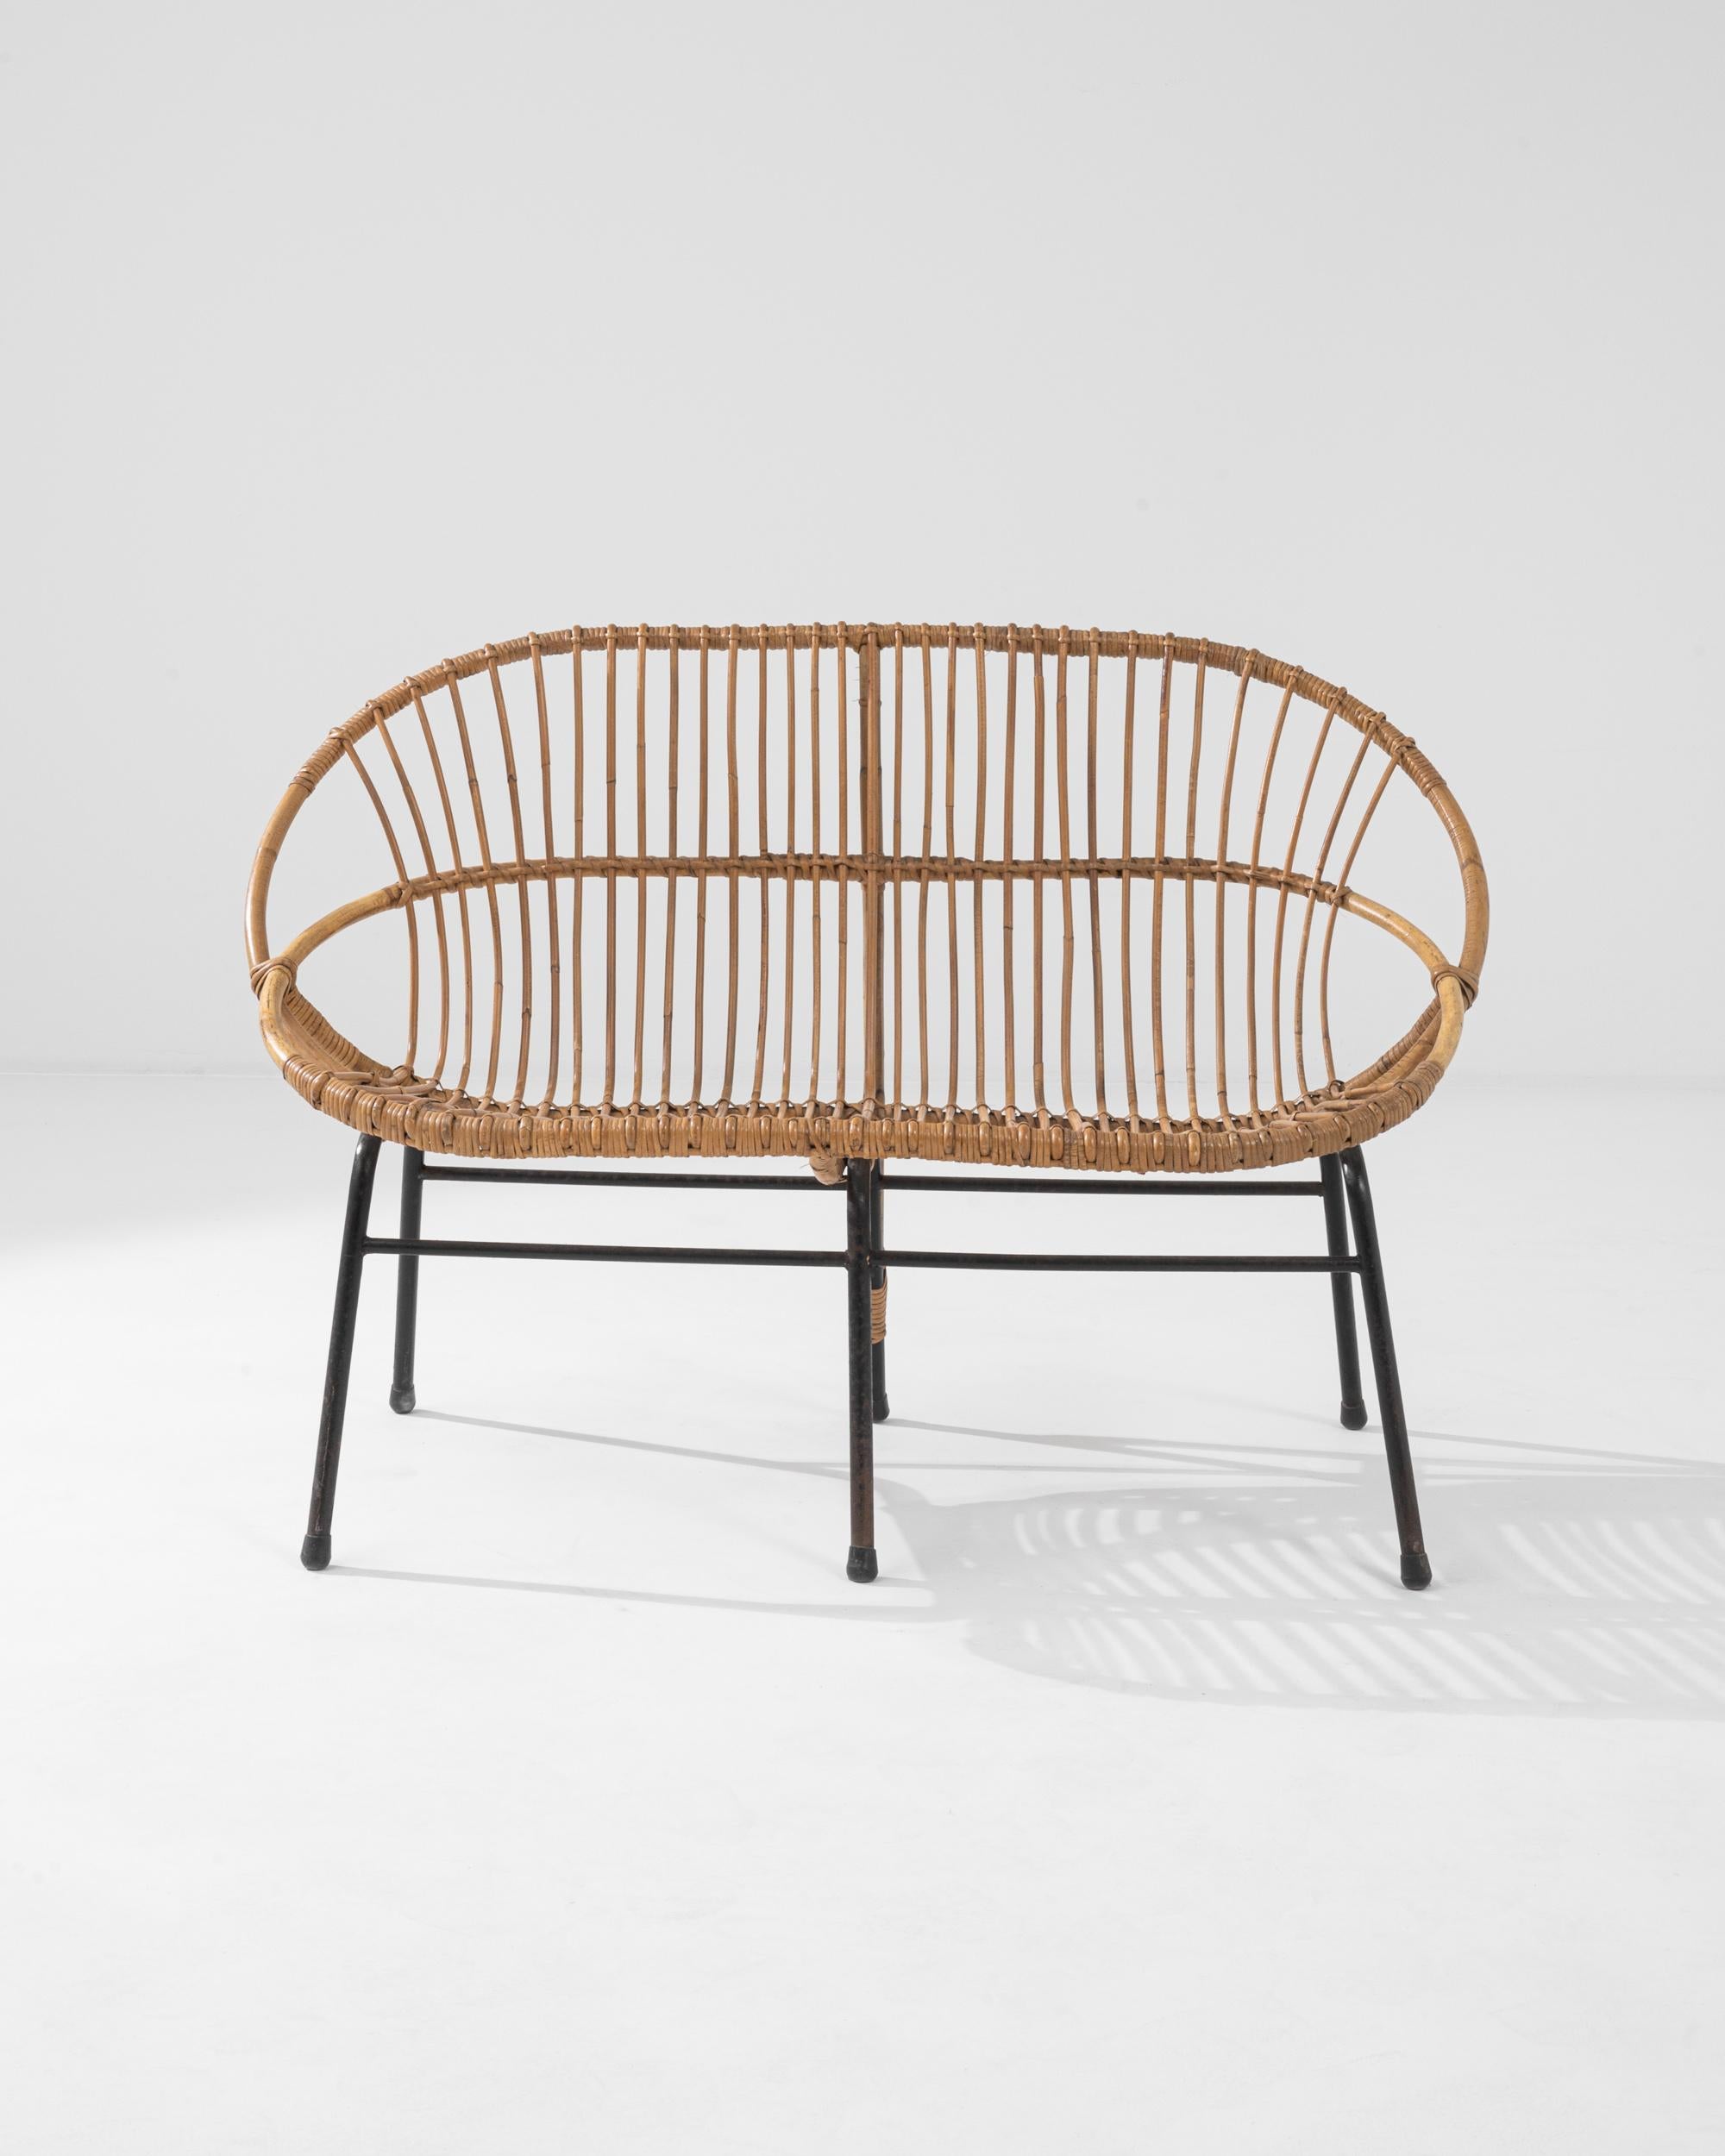 A wicker settee from France, circa 1960. This French-made bench is a playful twist on a mid-century classic. Using lashed together rattan, artisans have crafted a chair both geometrically pleasing and surprisingly comfortable. Created by bending